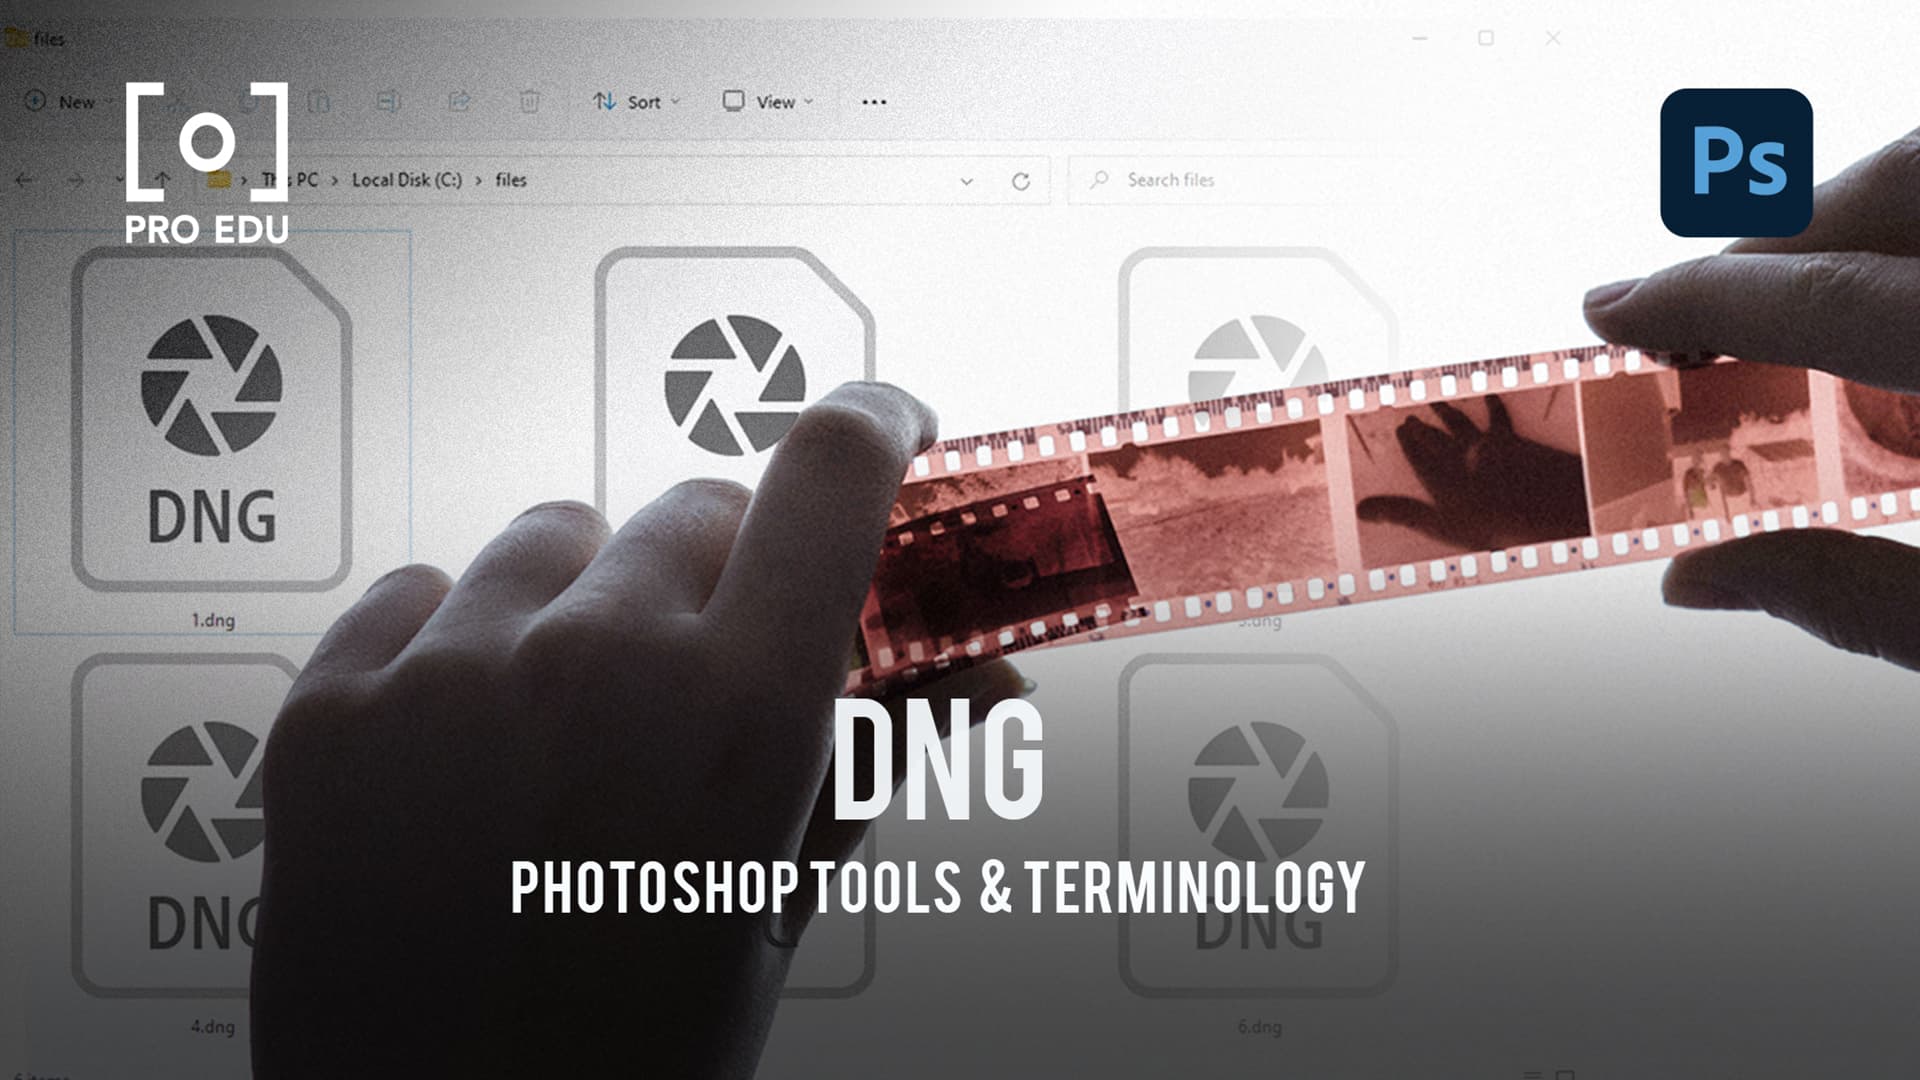 DNG File Format in Photoshop - PRO EDU Tutorial